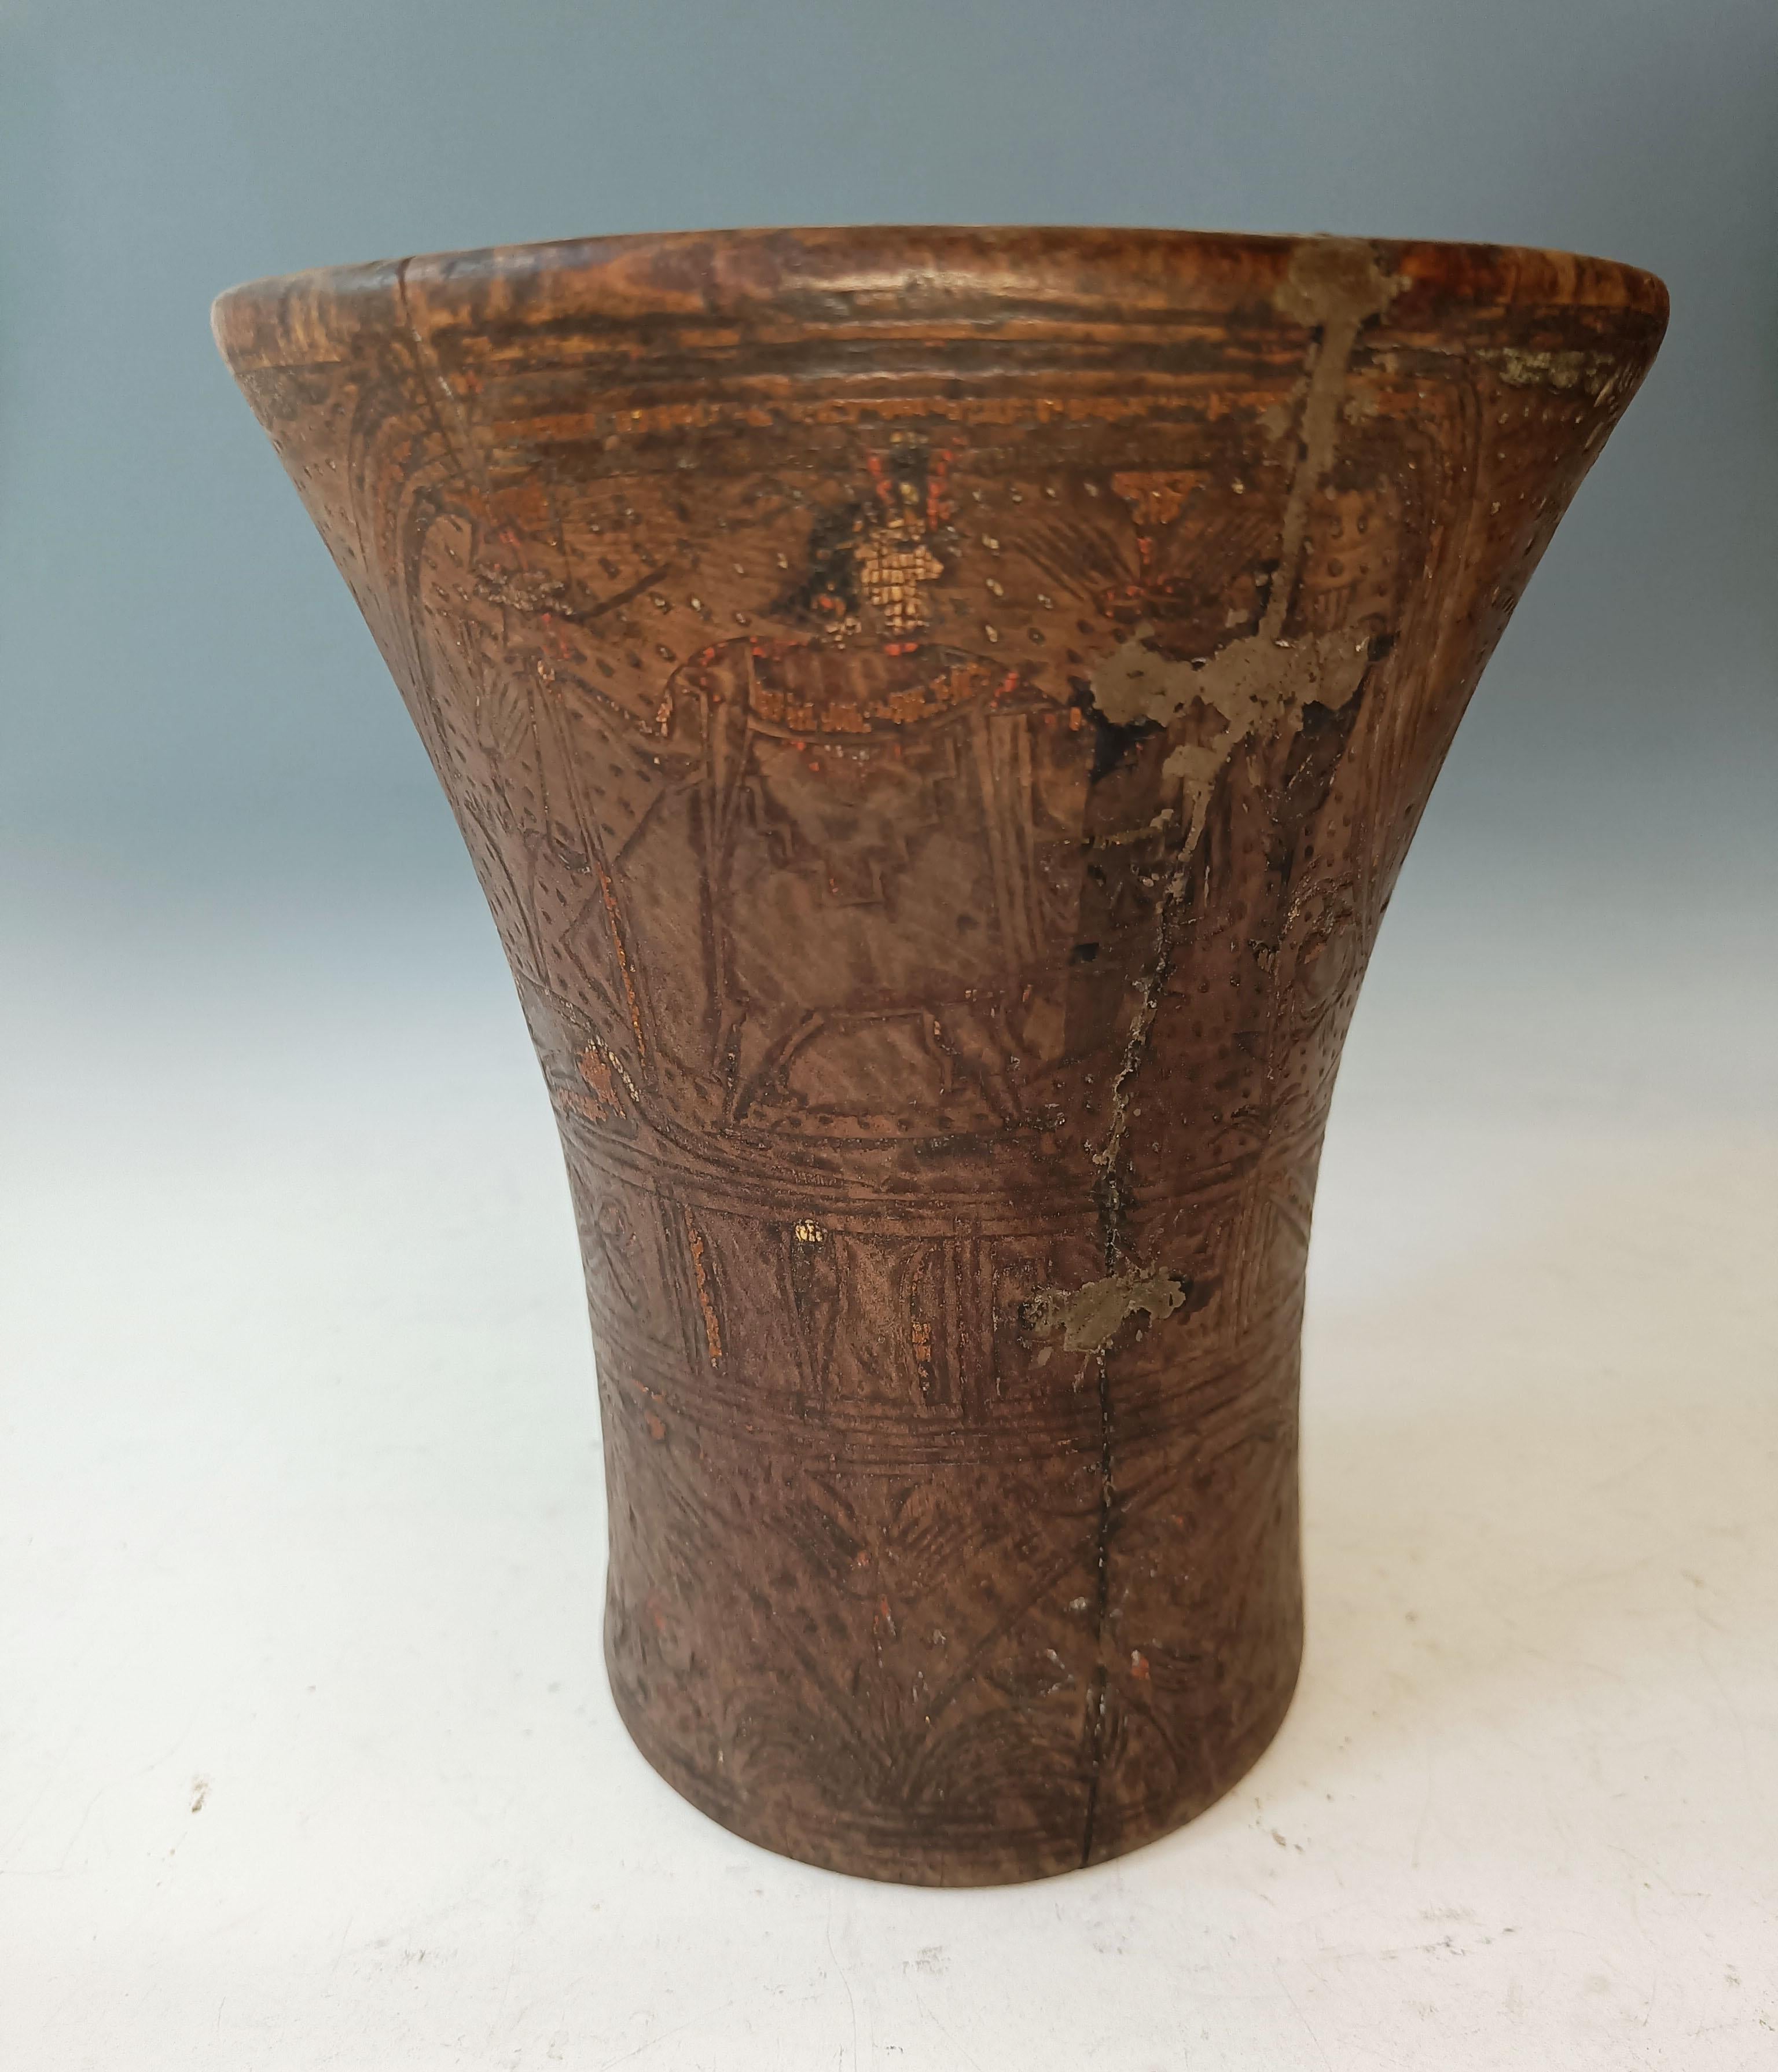 Large Pre Columbian  INCA / Early Colonial period  Wood Kero   
A superb Large Inca Kero cup profusely carved in the mosaic style with a image of the Inca or high ranking Lord with a staff and shield beside a  Puma, Humming birds feeding on  flowers